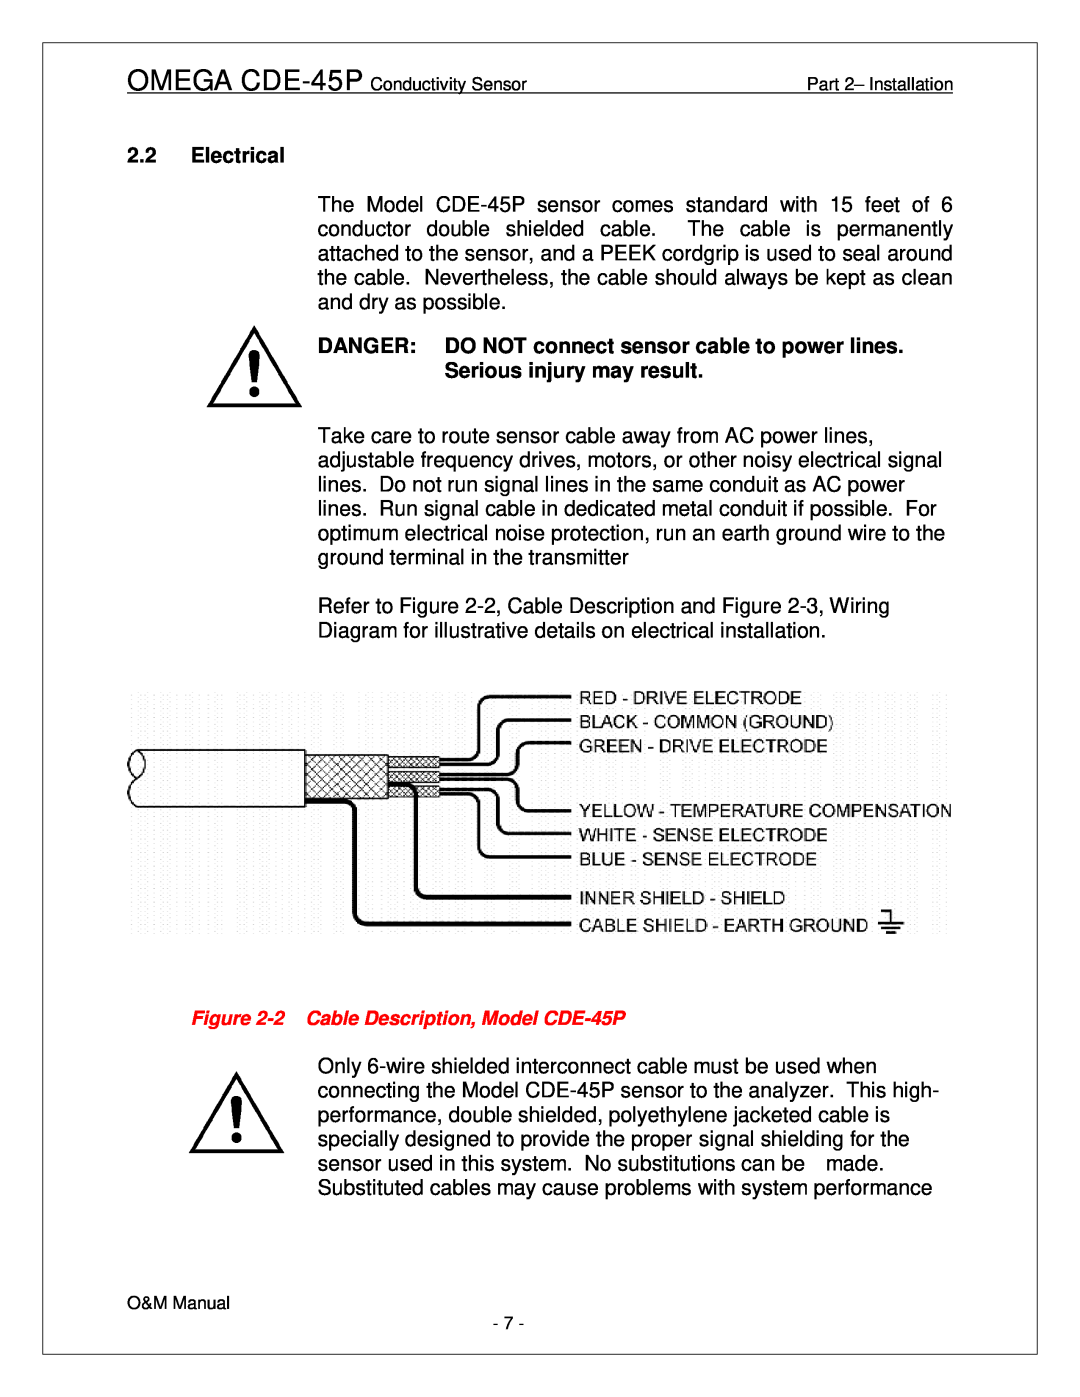 Omega Engineering CDE-45P manual Electrical, DANGER DO NOT connect sensor cable to power lines, Serious injury may result 